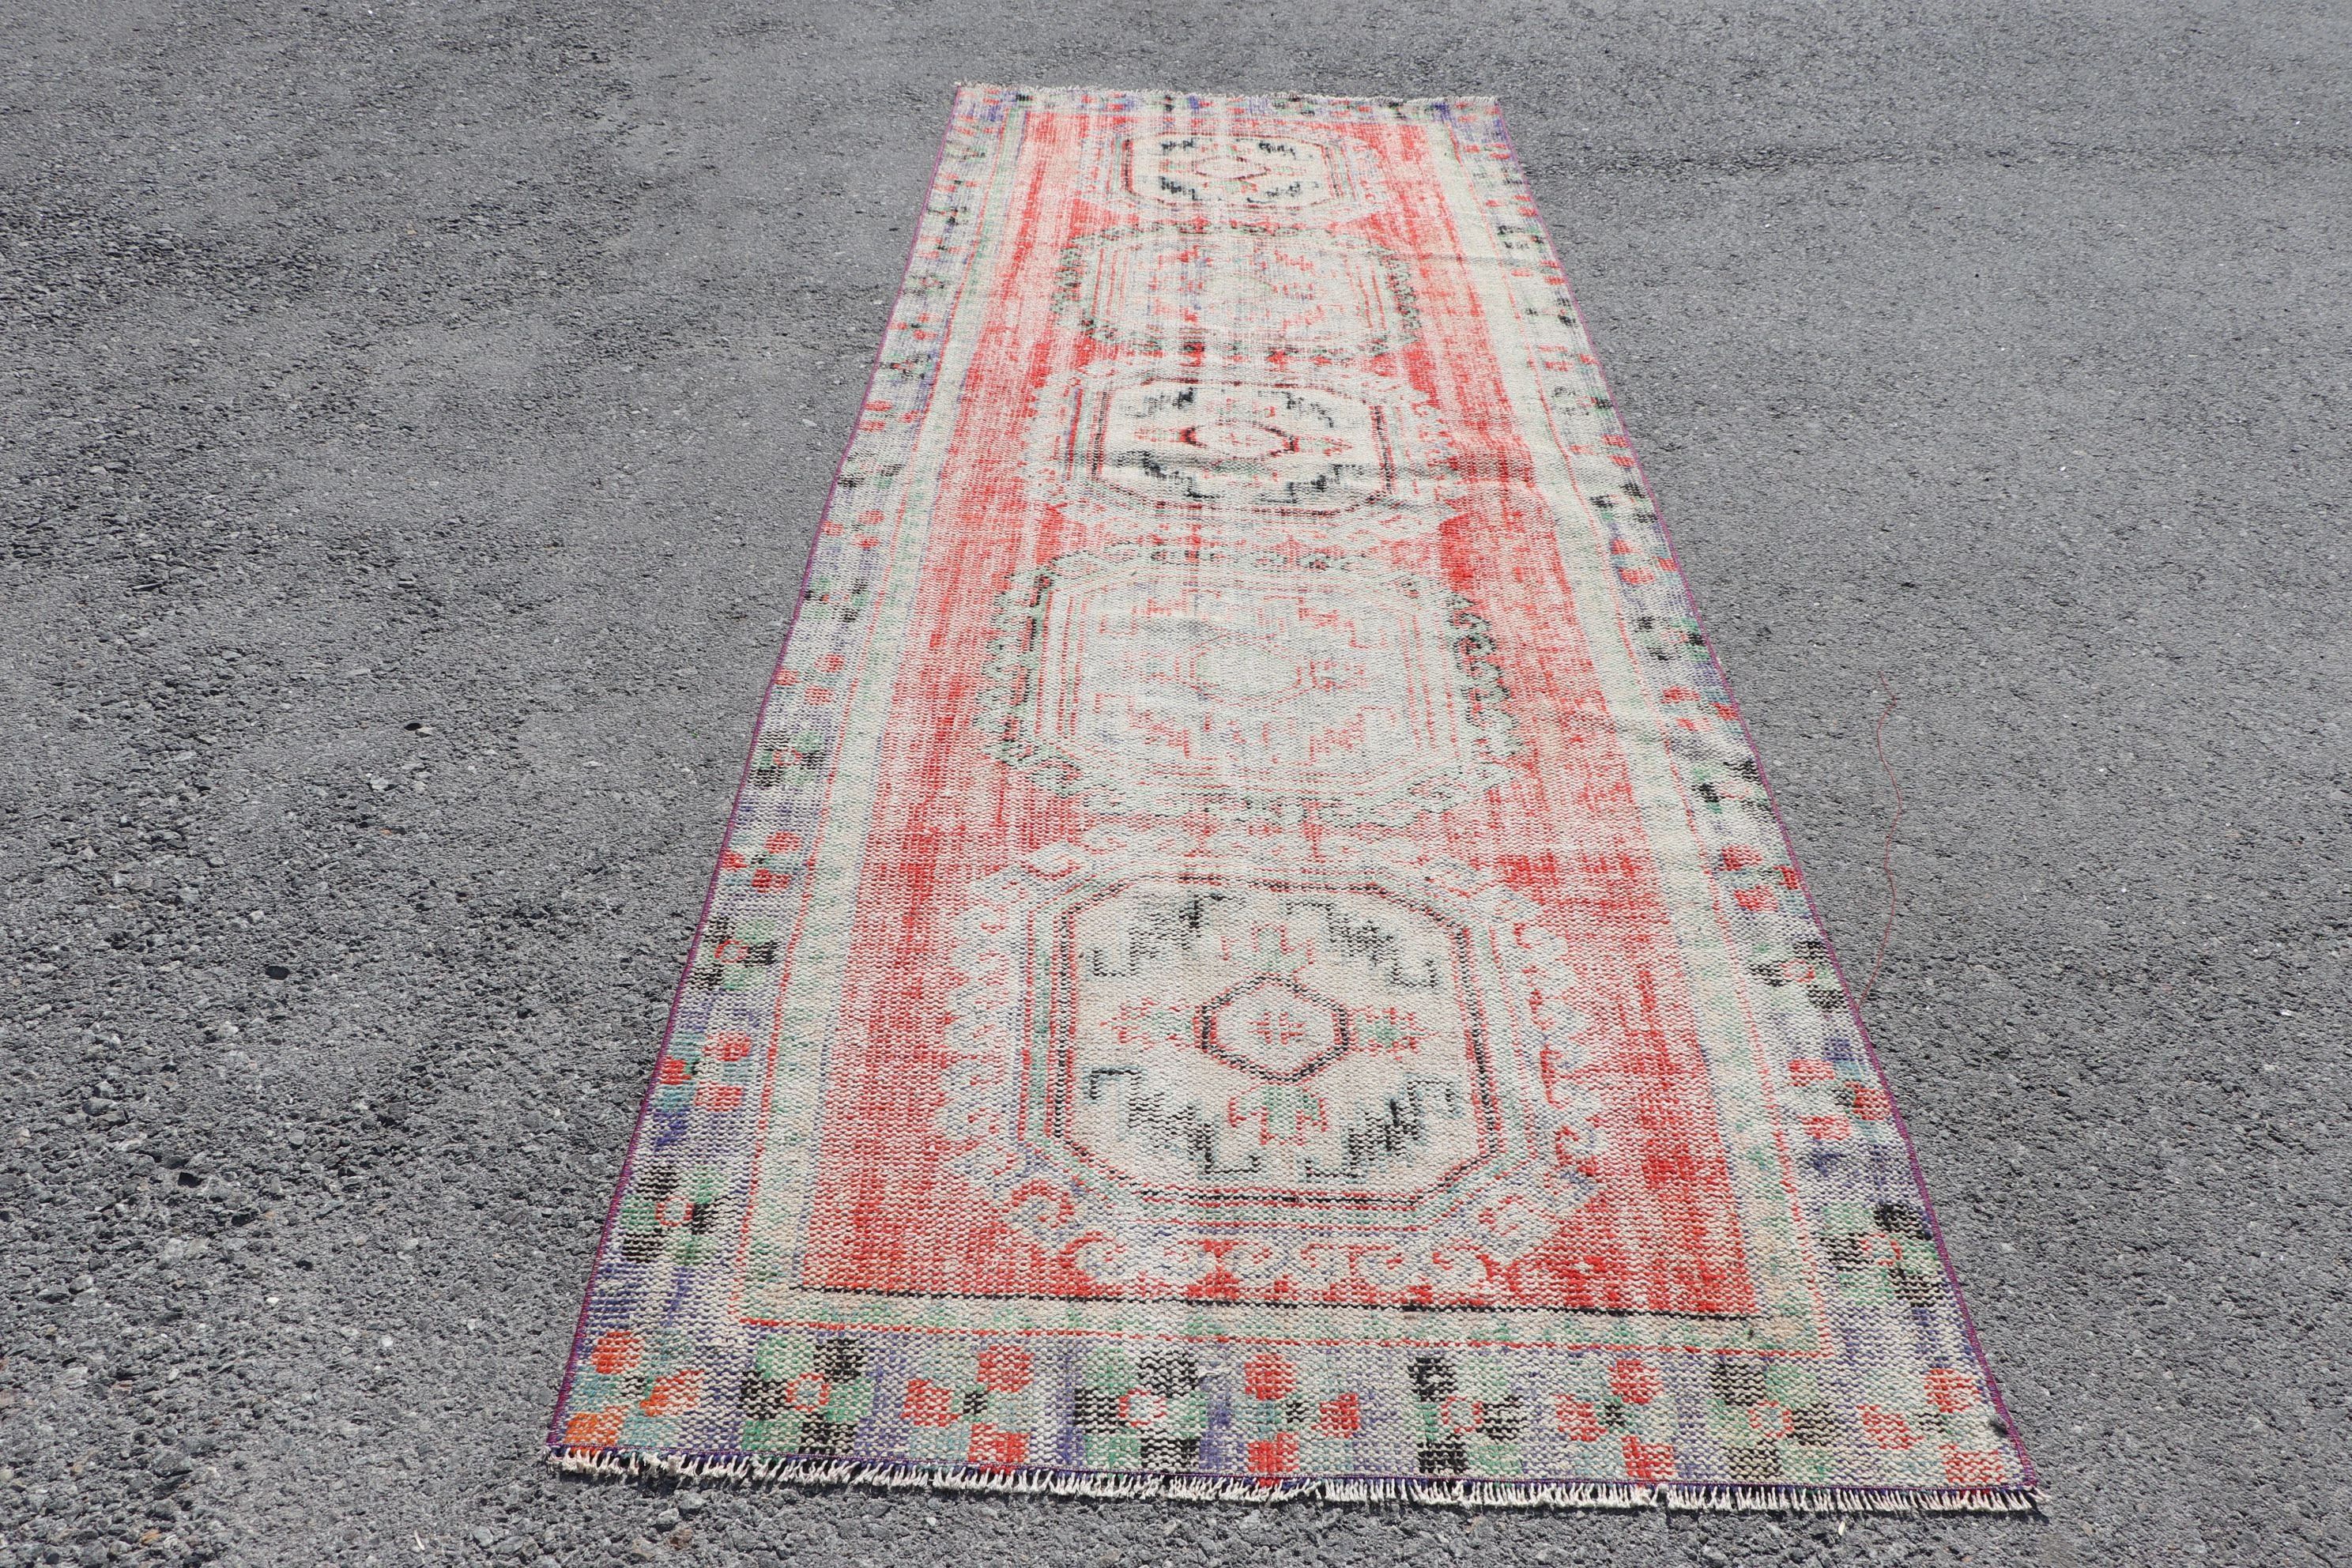 Organic Rug, Vintage Rugs, Rugs for Kitchen, Oriental Rug, Turkish Rugs, Red  4x11.4 ft Runner Rugs, Cool Rug, Kitchen Rug